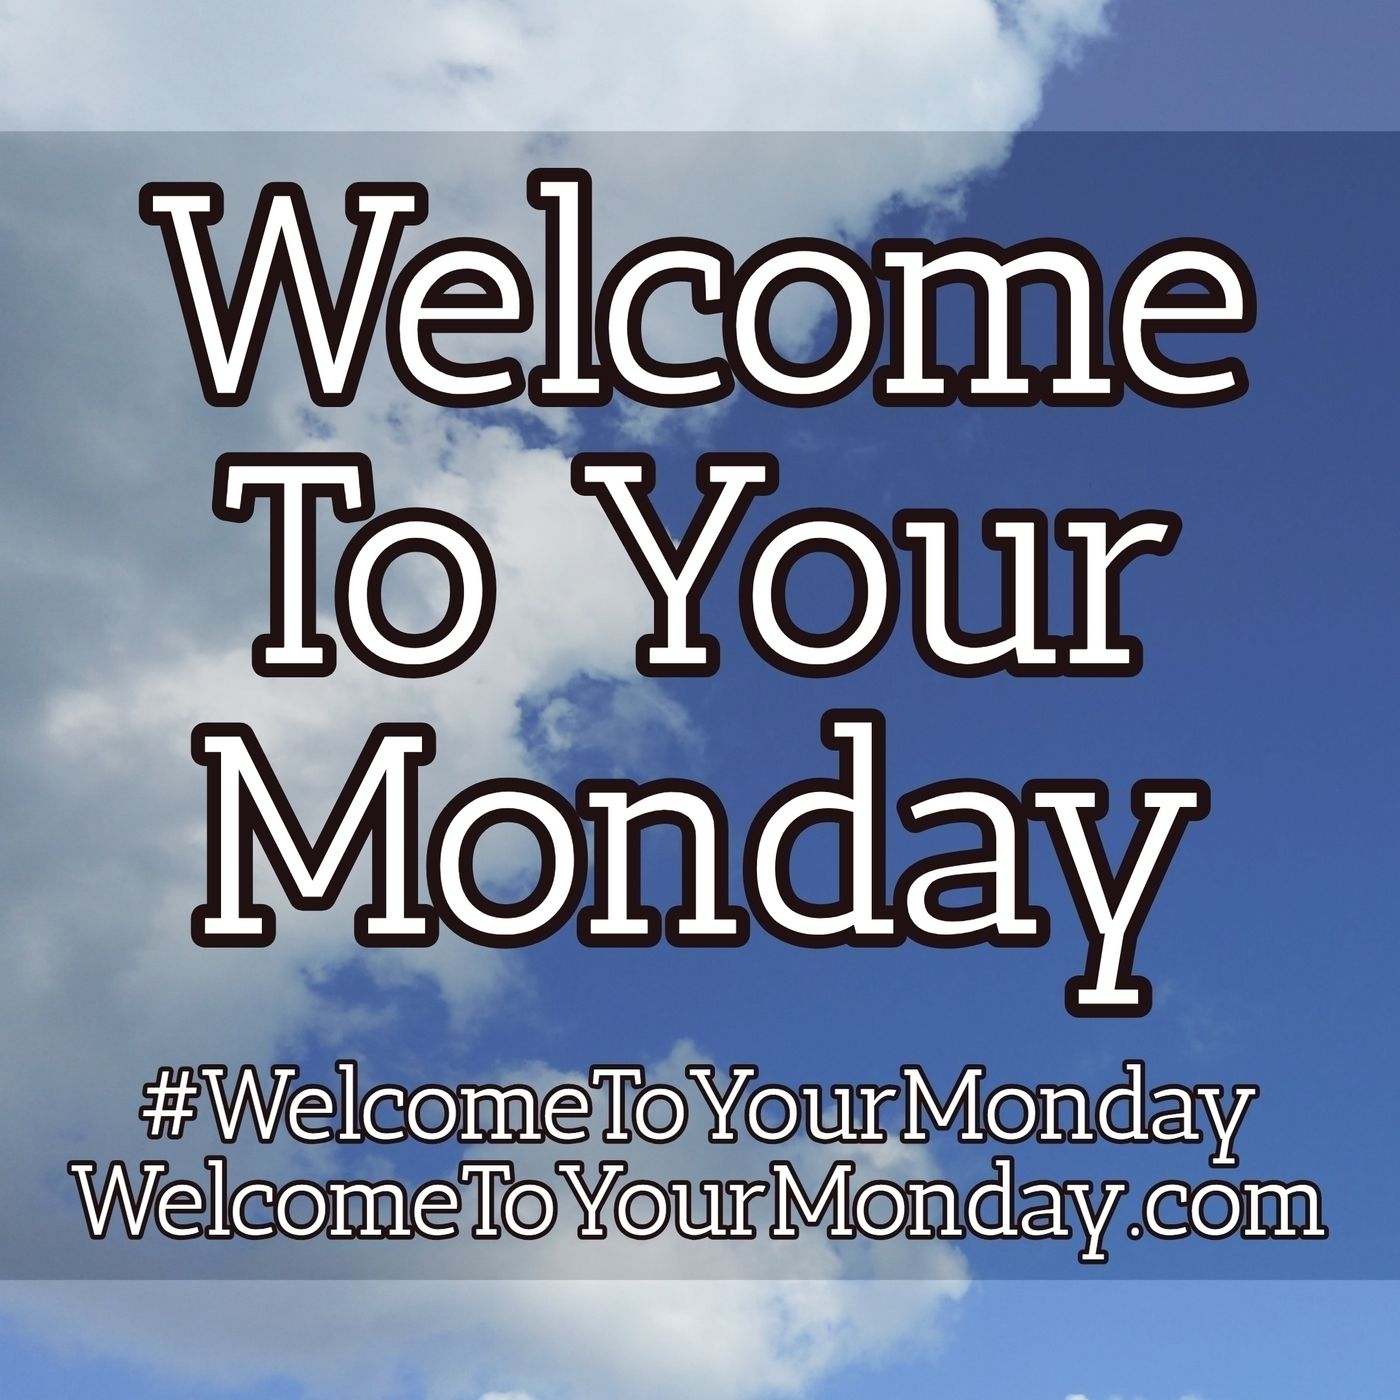 Welcome To Your Monday Message For 3/25/2019